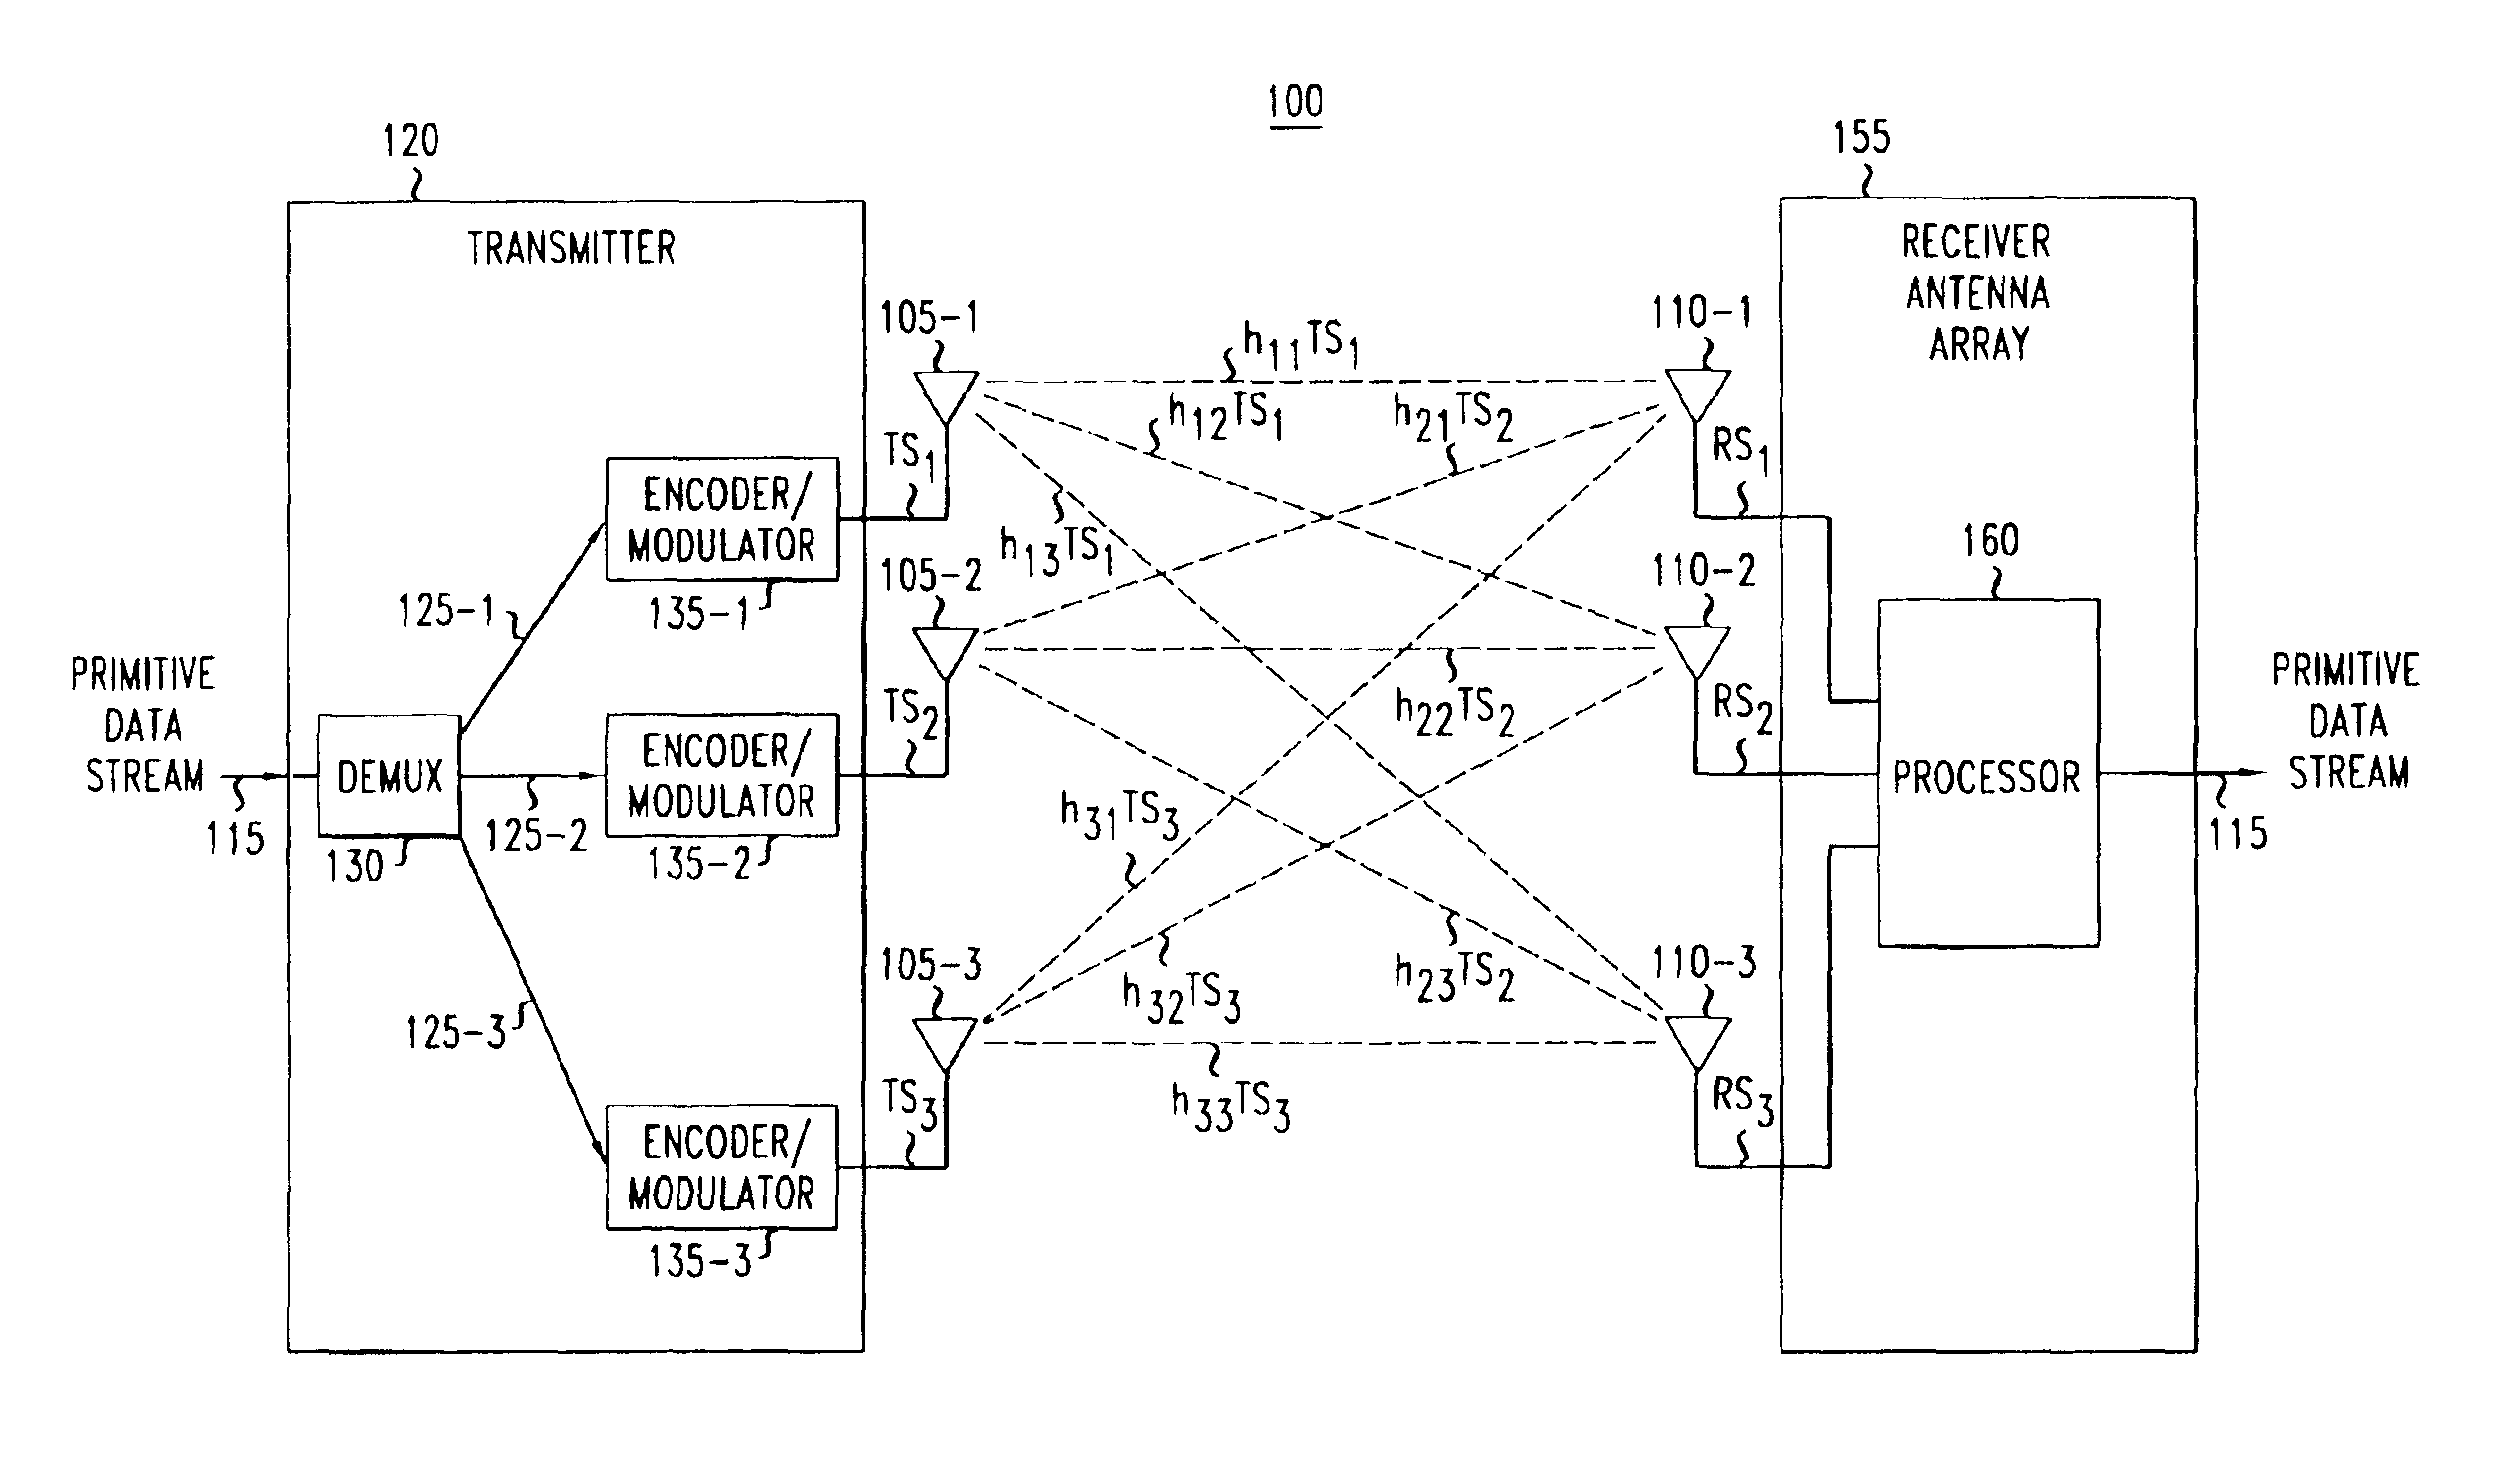 Determining channel characteristics in a wireless communication system that uses multi-element antenna